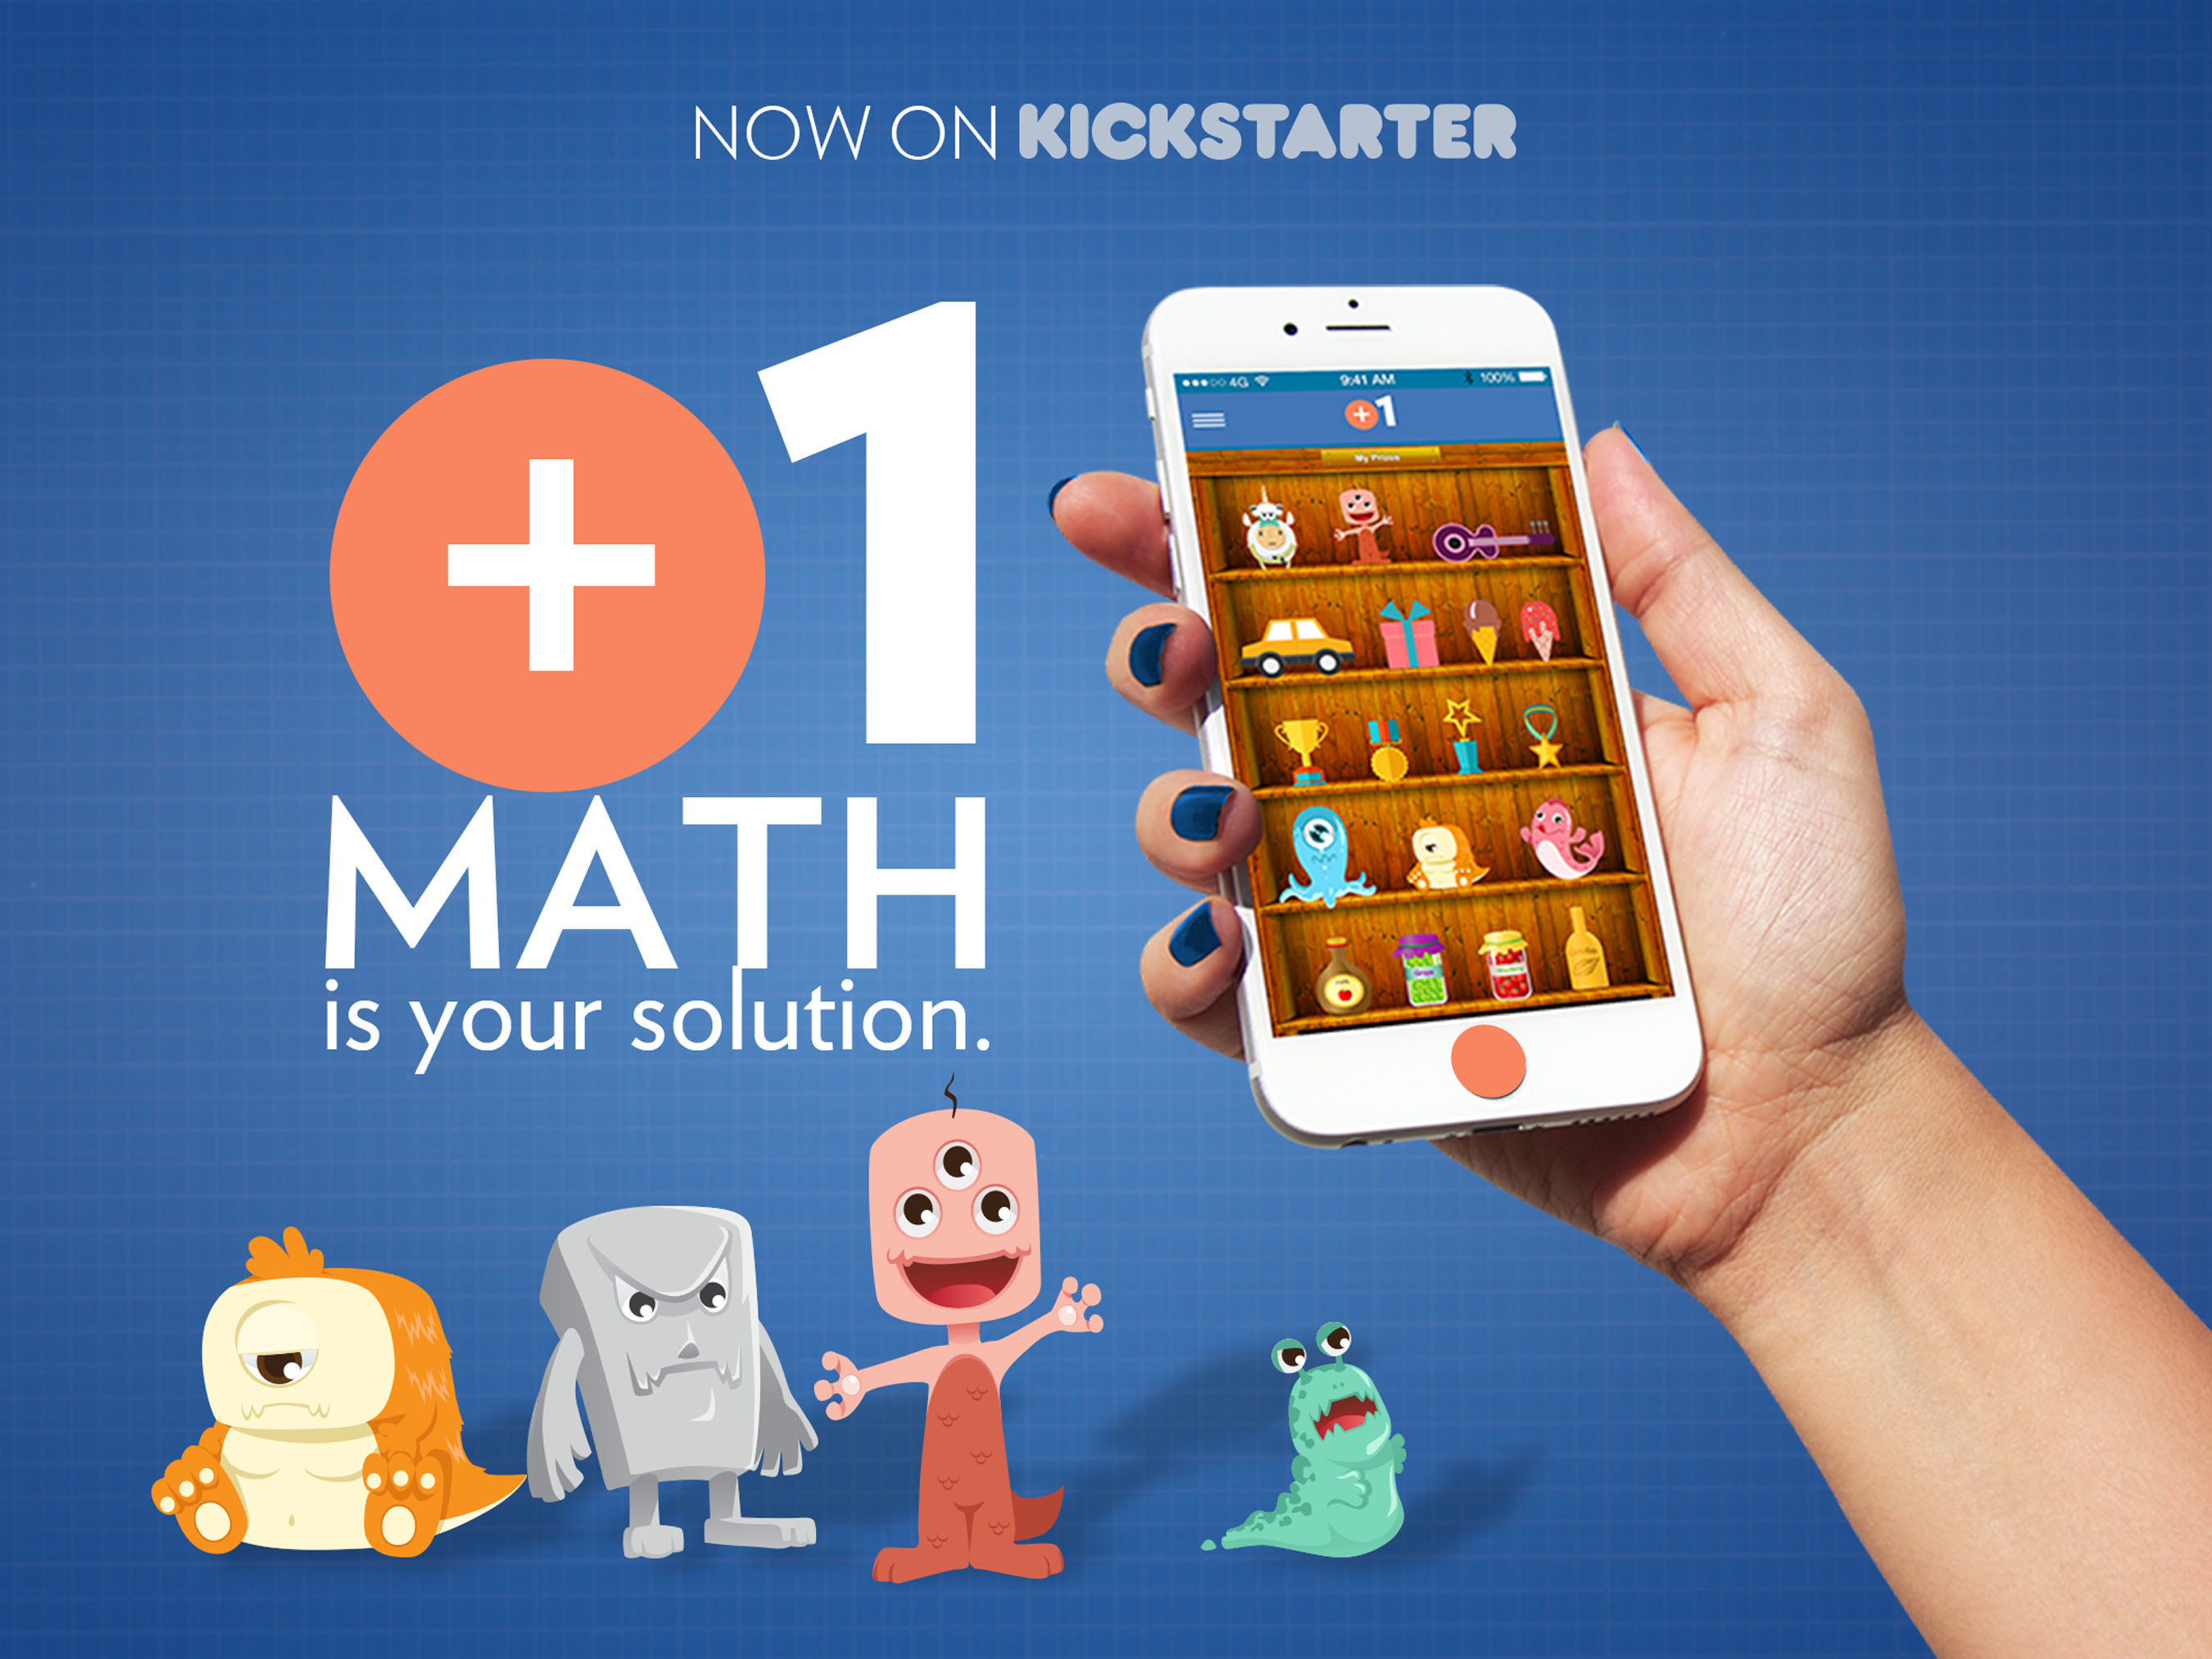 The U.S. has a Math Crisis. You can Help. Only 26% of high school seniors test at grade level in math. Internationally, the U.S. ranks 30th in math proficiency.  We're creating the +1Math app for kids that works on Smartphones, Tablets or Desktop Computers. +1Math will help students get seriously better at math in an easy, fun way that will pay off big-time in school, on standardized tests, and beyond. We're going to give it away for free to students from low-income families: 250,000 in the first year alone!